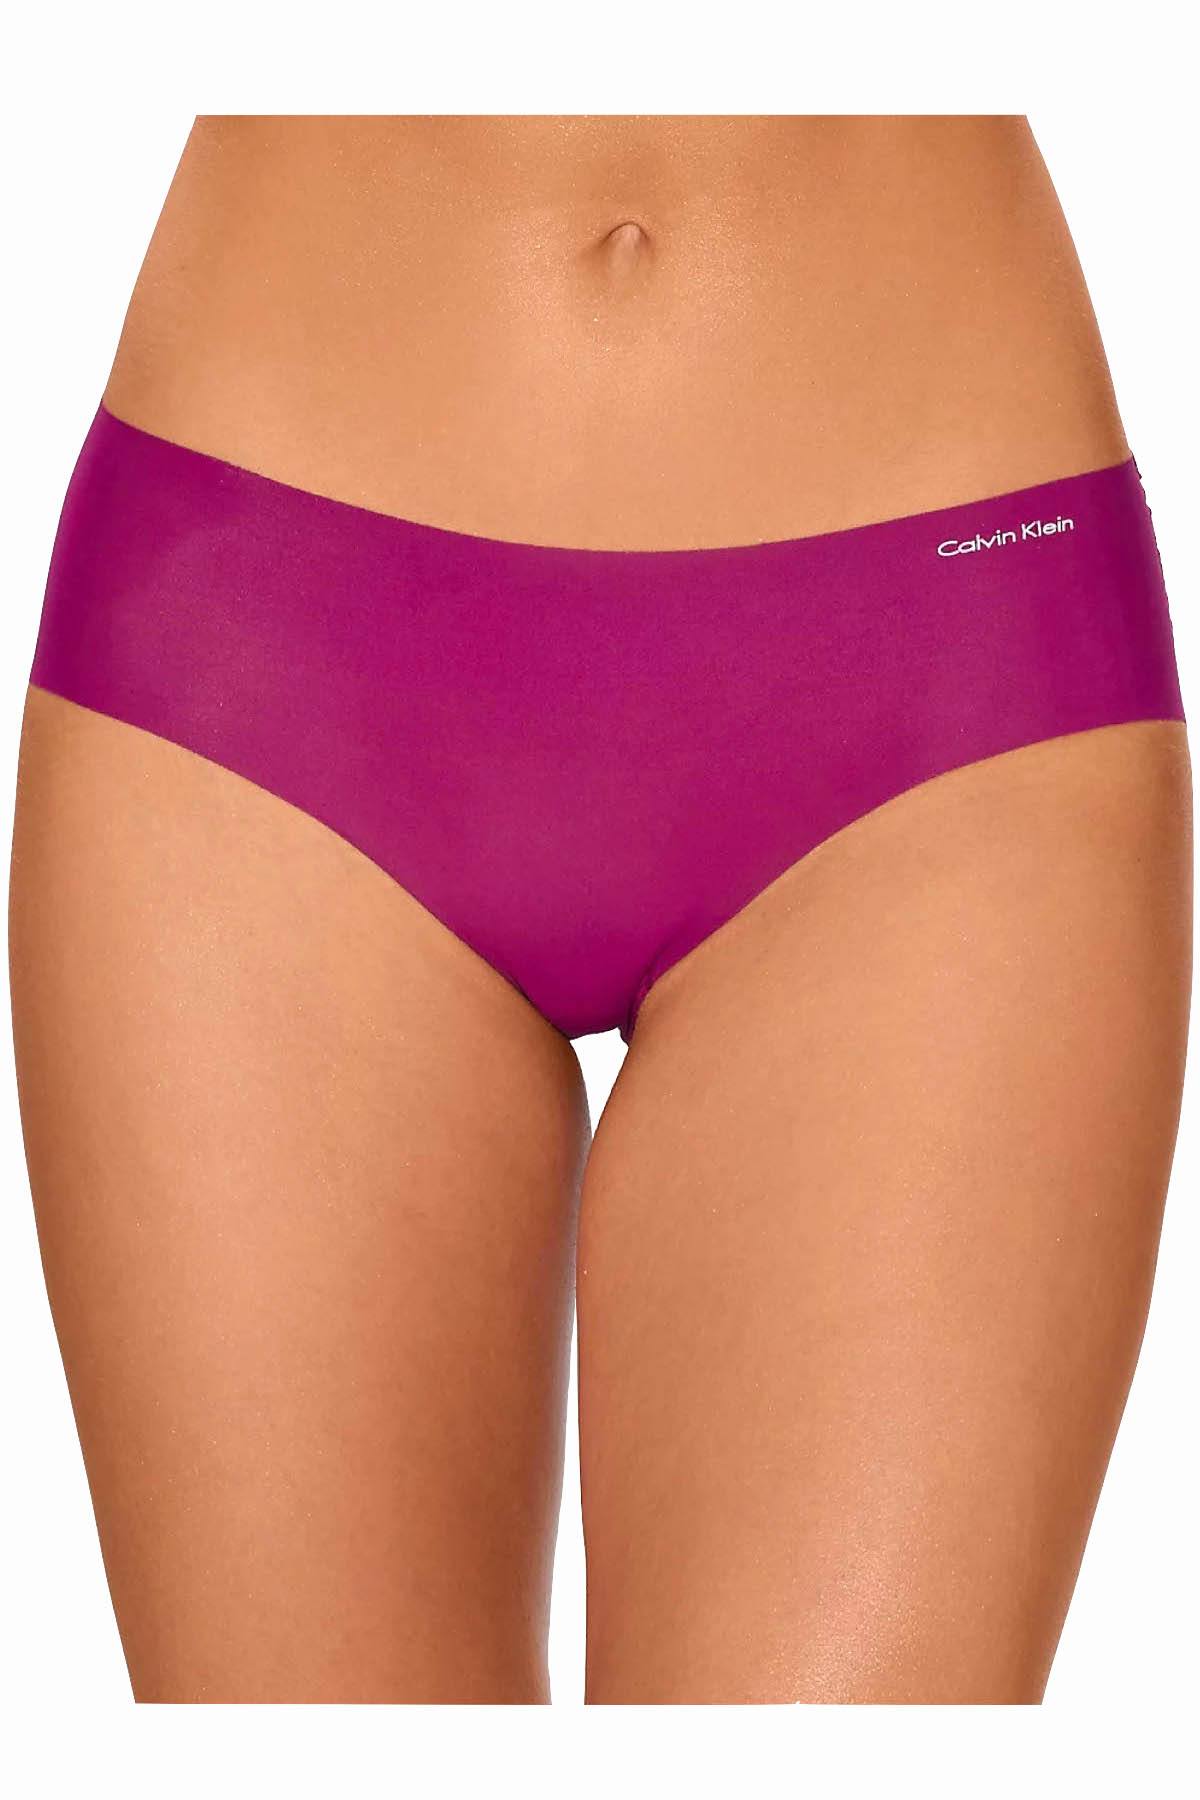 Calvin Klein Fathom-Mulberry Invisible Hipster Panty – CheapUndies